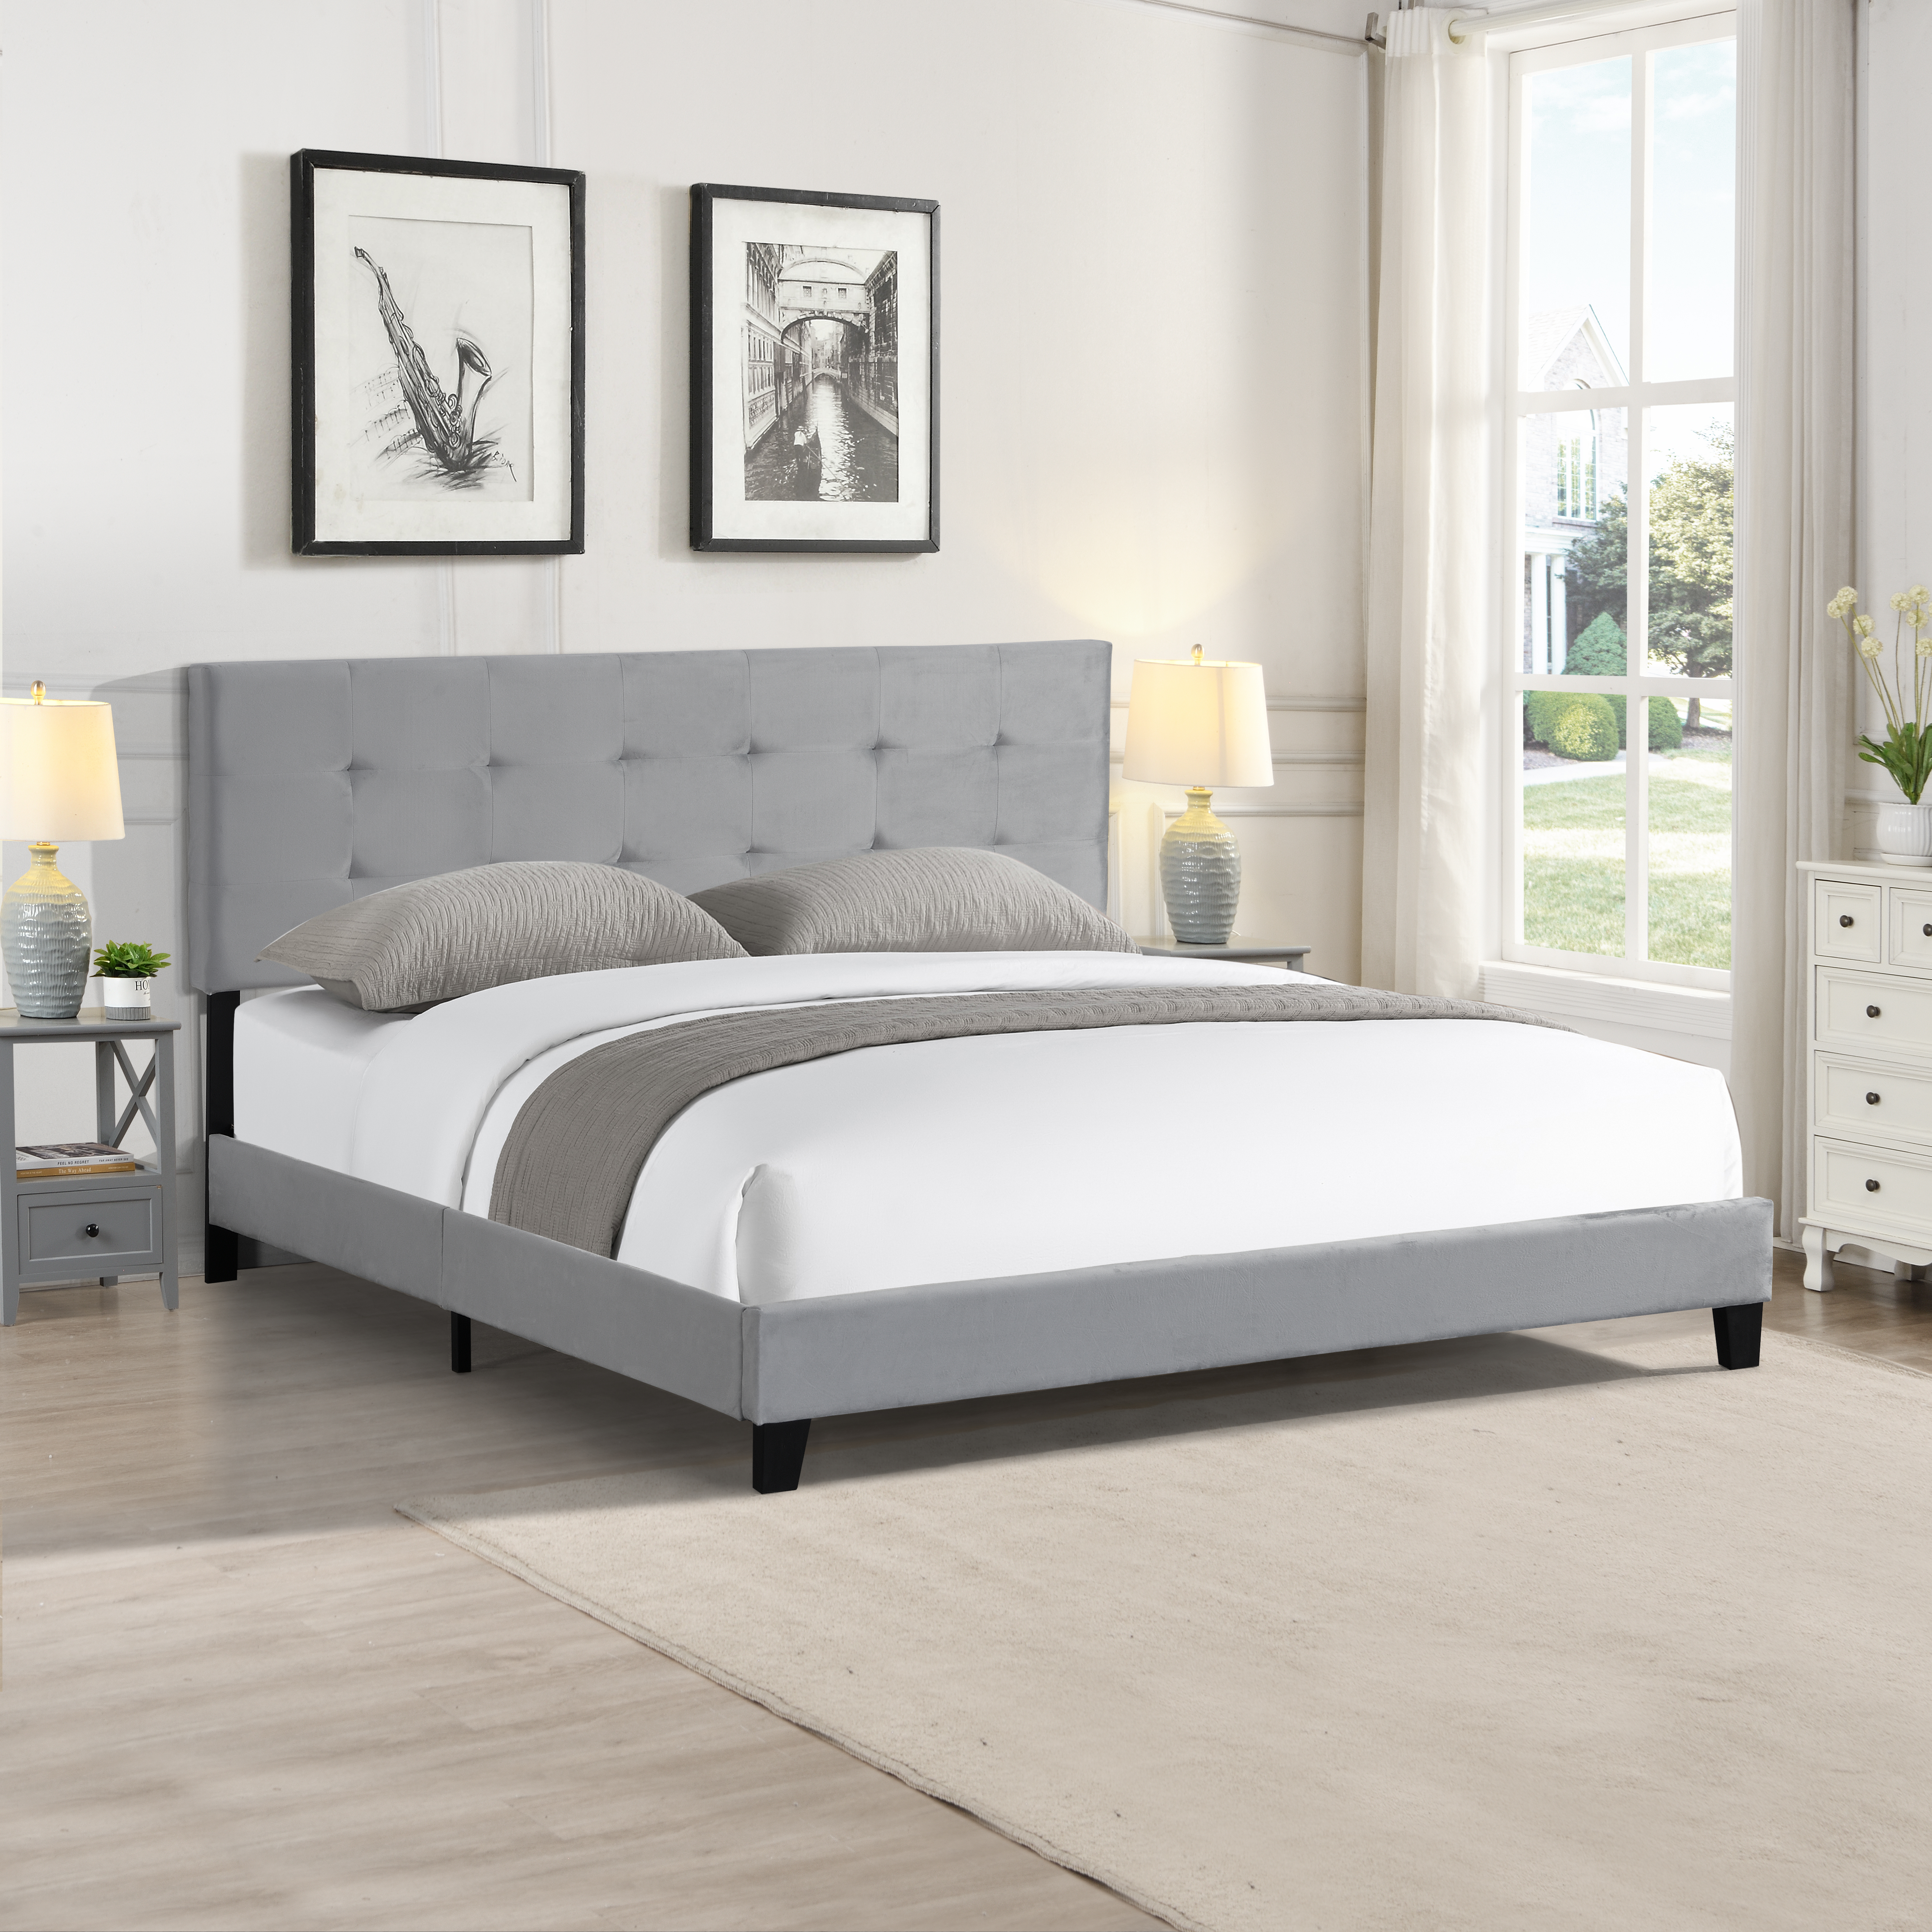 King Size Upholstered  Platform Bed Frame with  pull point Tufted Headboard, Strong Wood Slat Support, Mattress Foundation, No Box Spring Needed,\n\nEasy Assembly, Gray-CASAINC